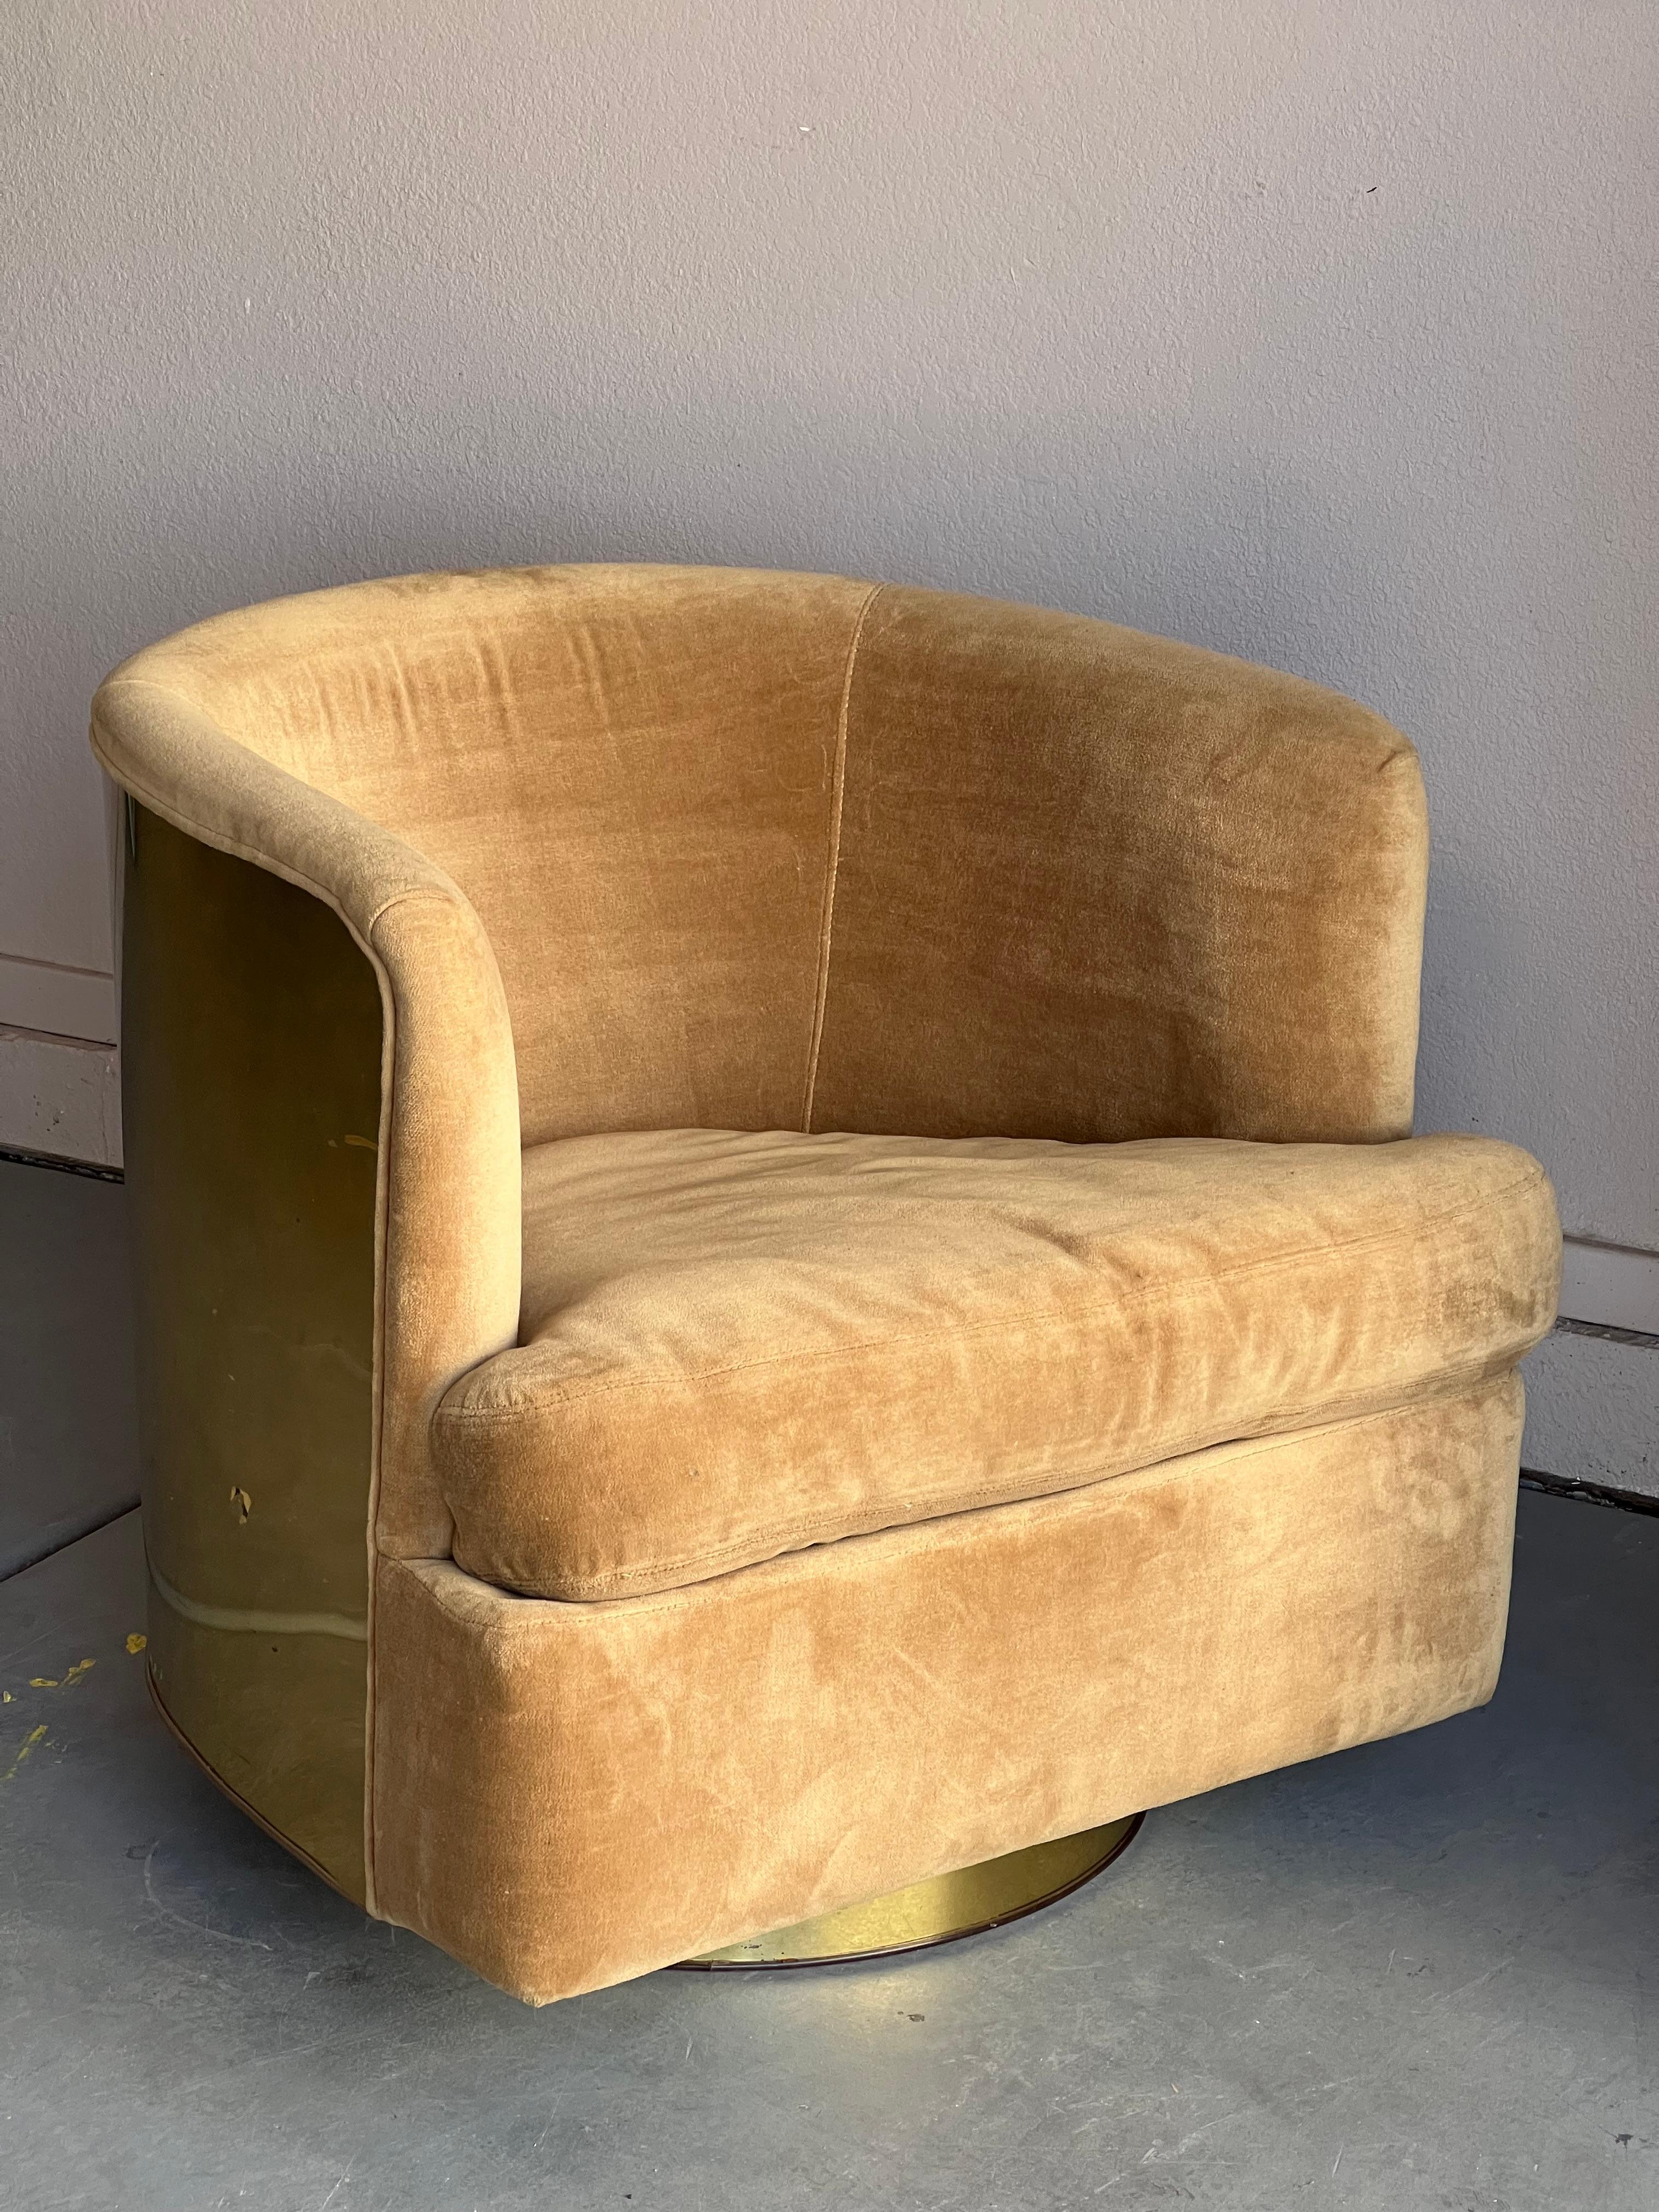 Highly sought-after brass wrapped barrel chair by Milo Baughman for Thayer Coggin. Swiveling and rocking. Original upholstery in nice vintage condition. Brass back shows signs of age and use.

High style with no sacrifice of comfort.  Measures 24